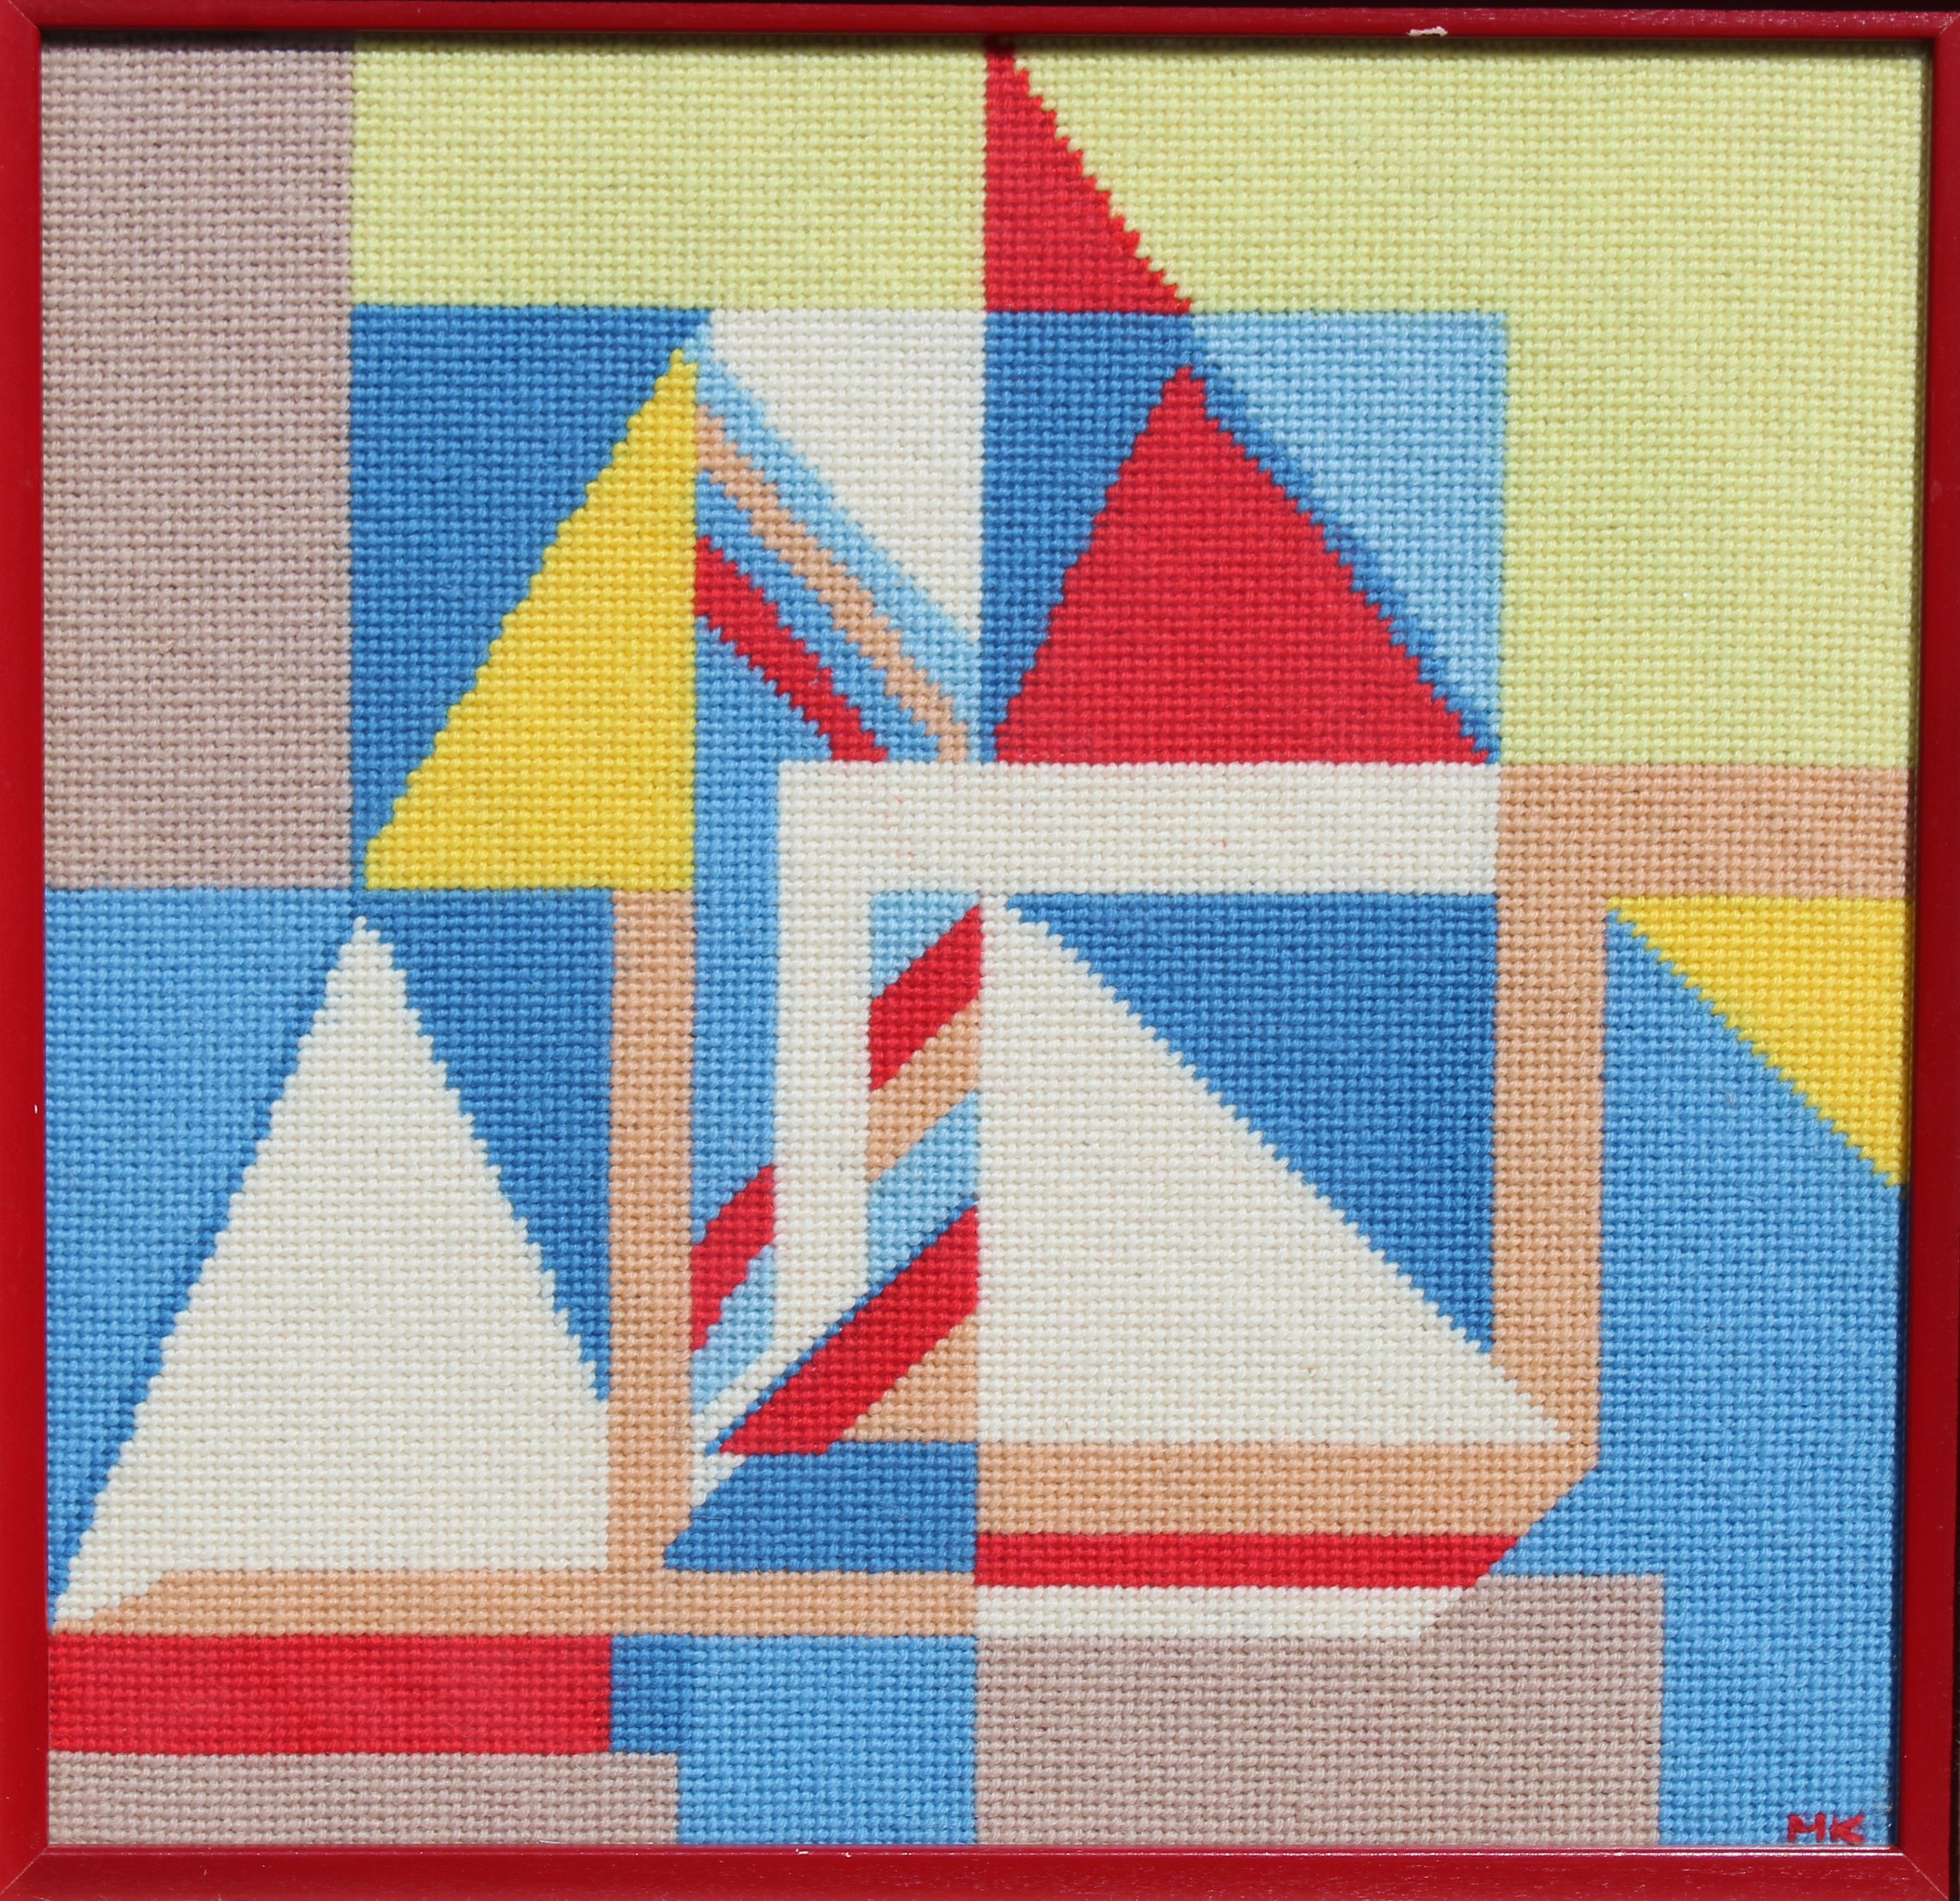 Signed Needlepoint Abstract Sailboat. Initialed lower right. Newman Galleries label verso. Image